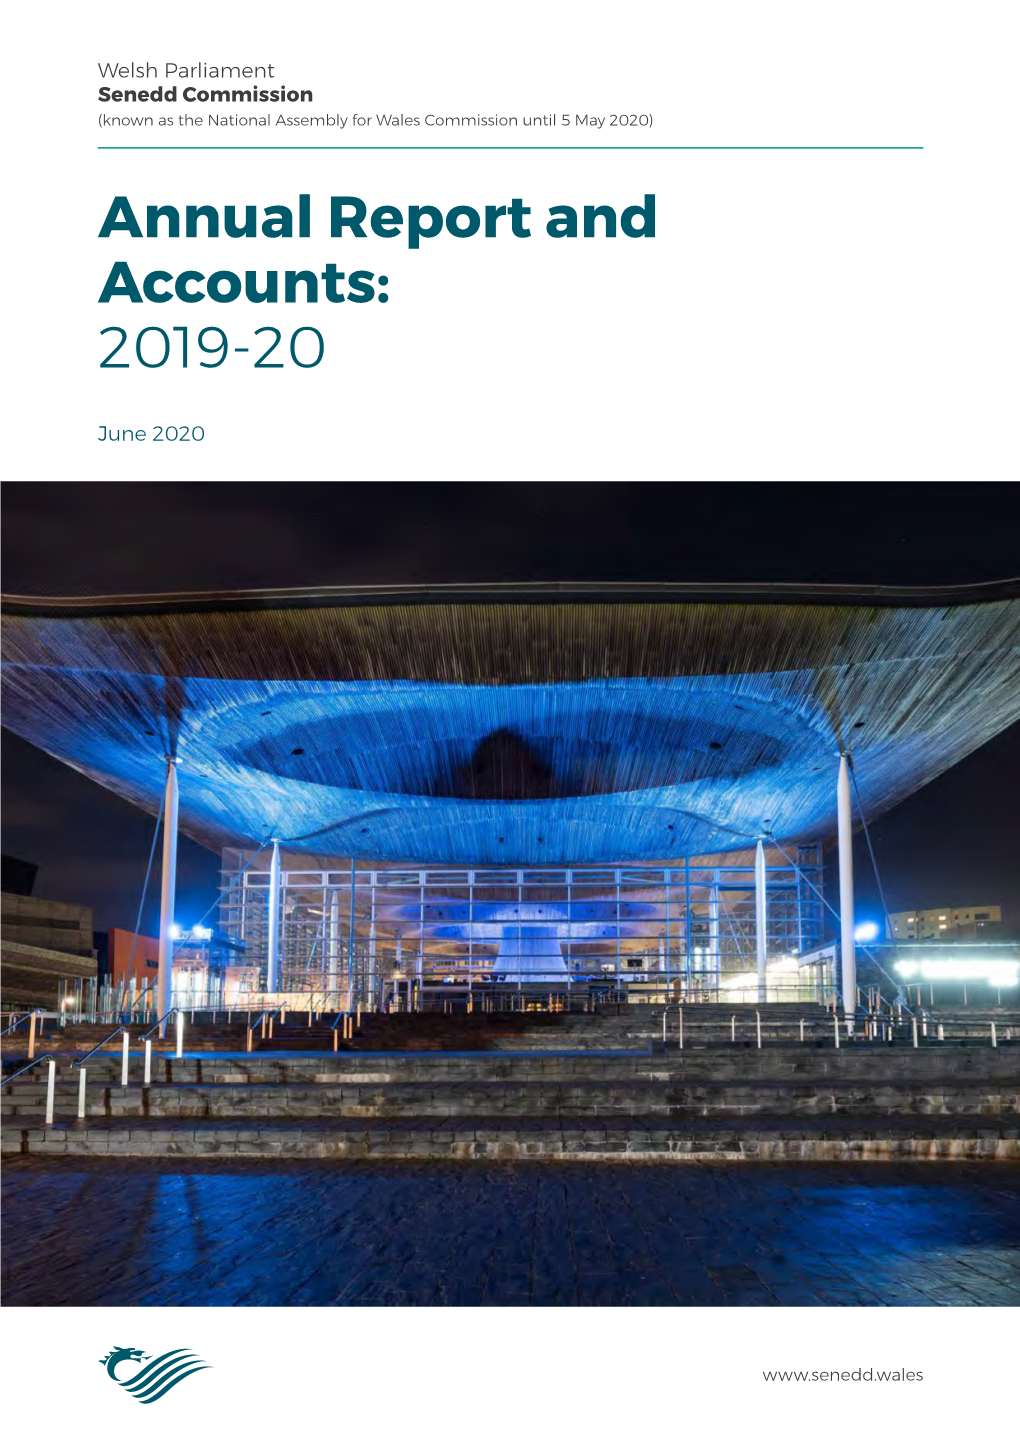 Annual Report and Accounts: 2019-20